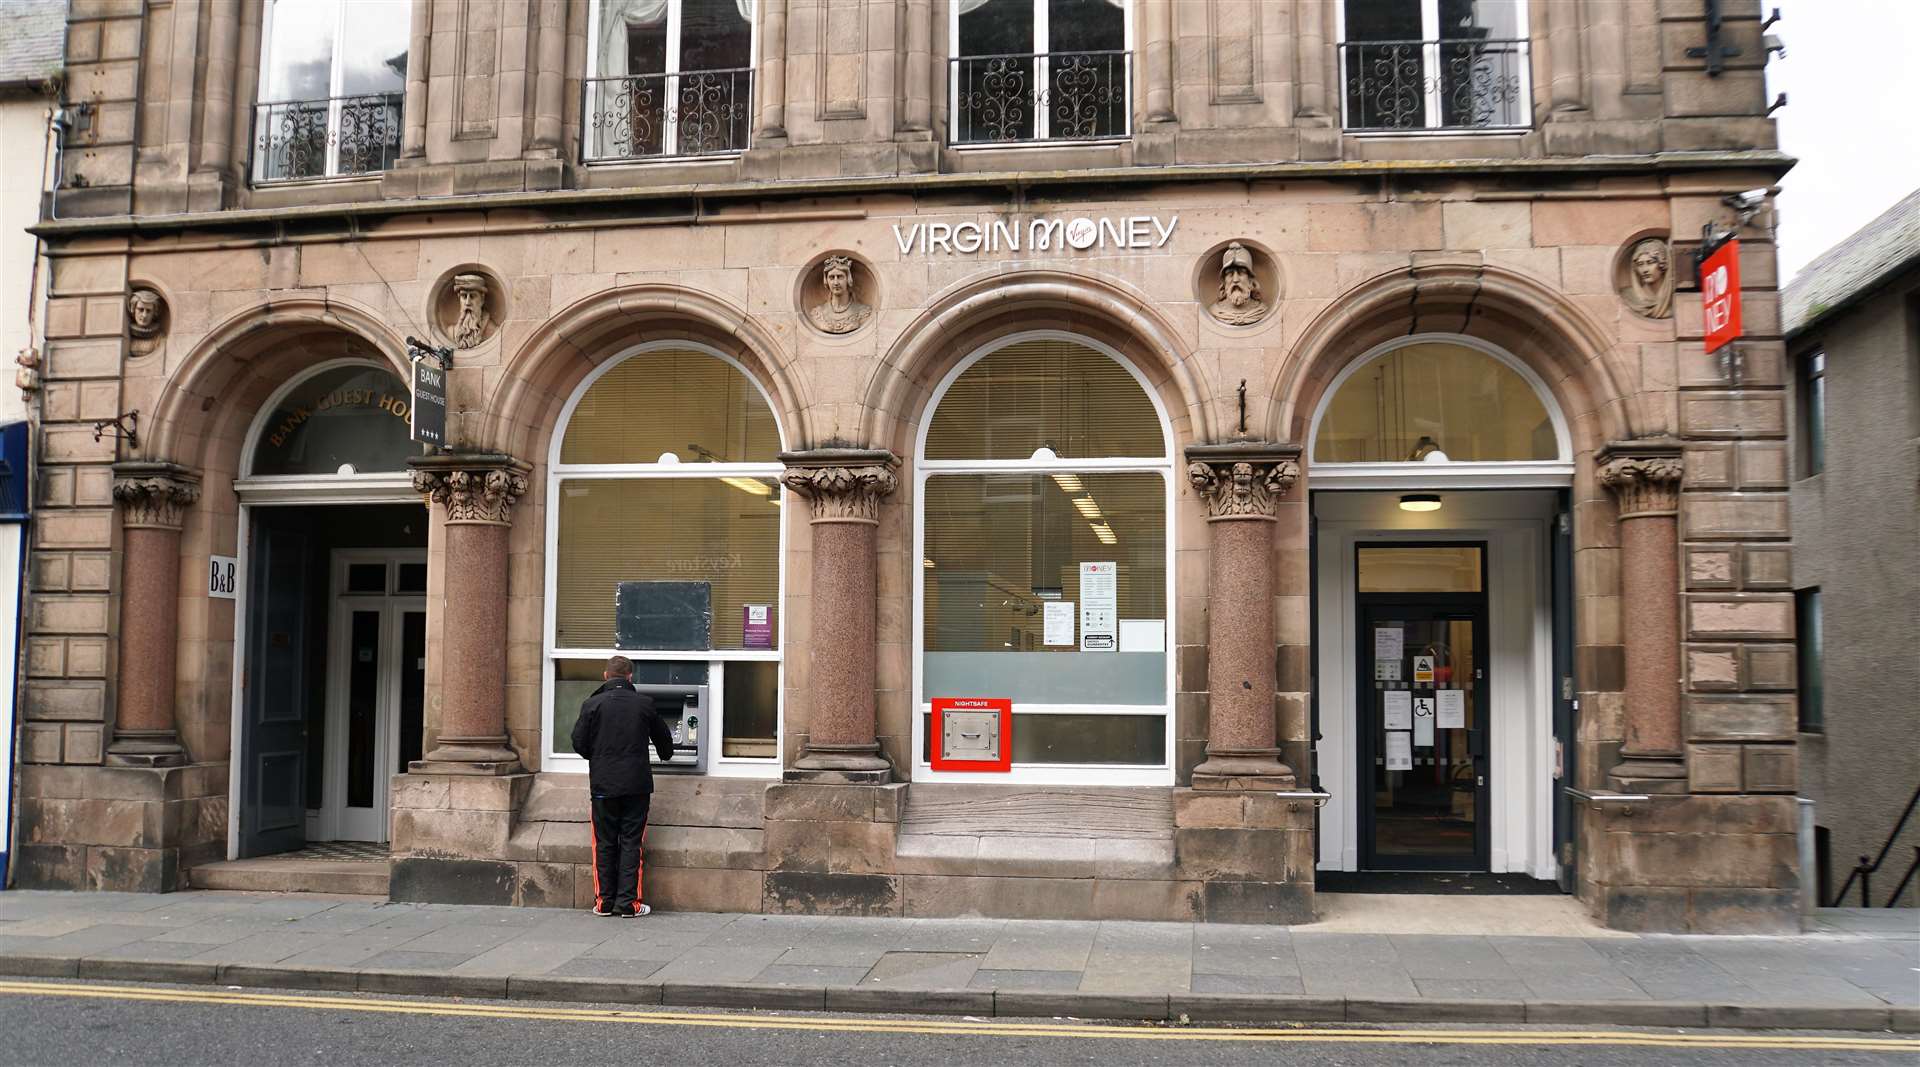 Virgin Money announced last week that it will shut its Wick branch as part of plans to close 12 sites across Scotland, citing 'changing customer demand'. Picture: DGS